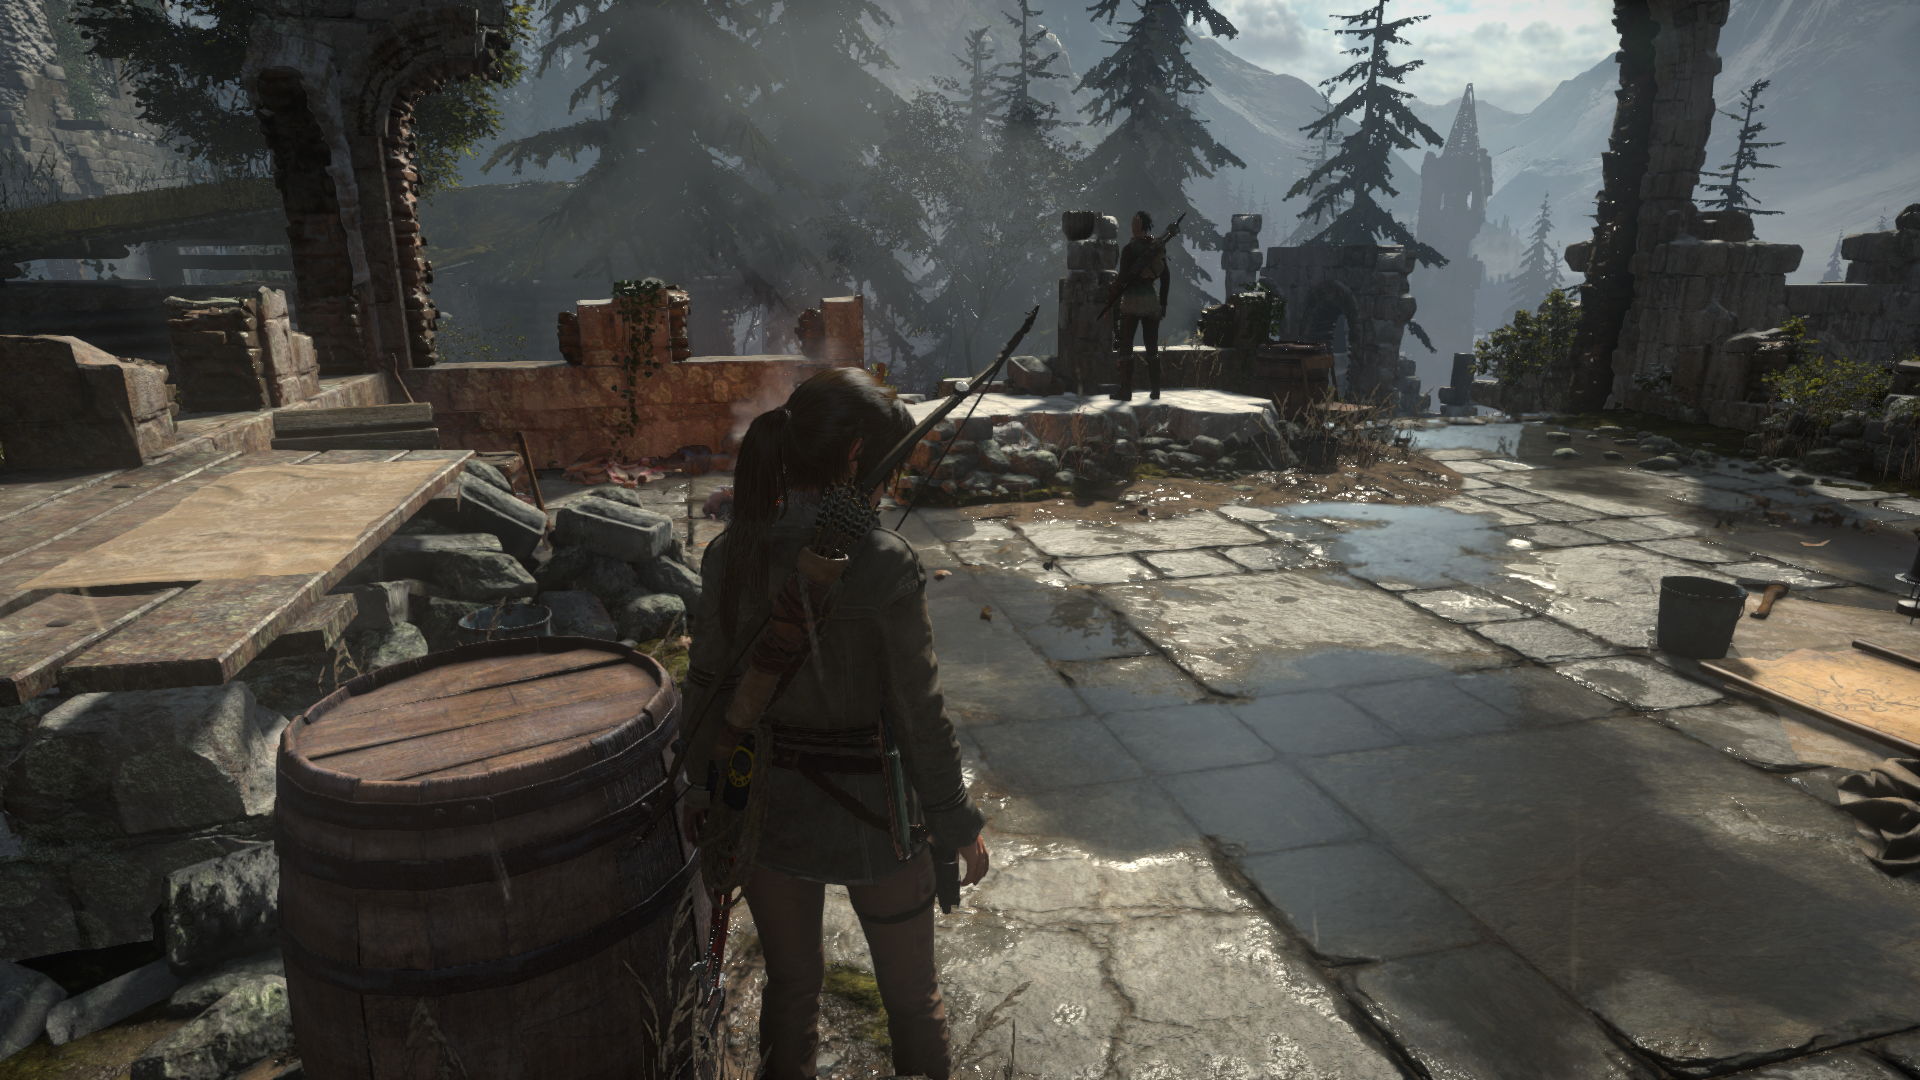 Rise of The Tomb Raider PC Performance Analyzed - NVIDIA and AMD Cards  Tested With Pure Hair and HBAO+ Settings